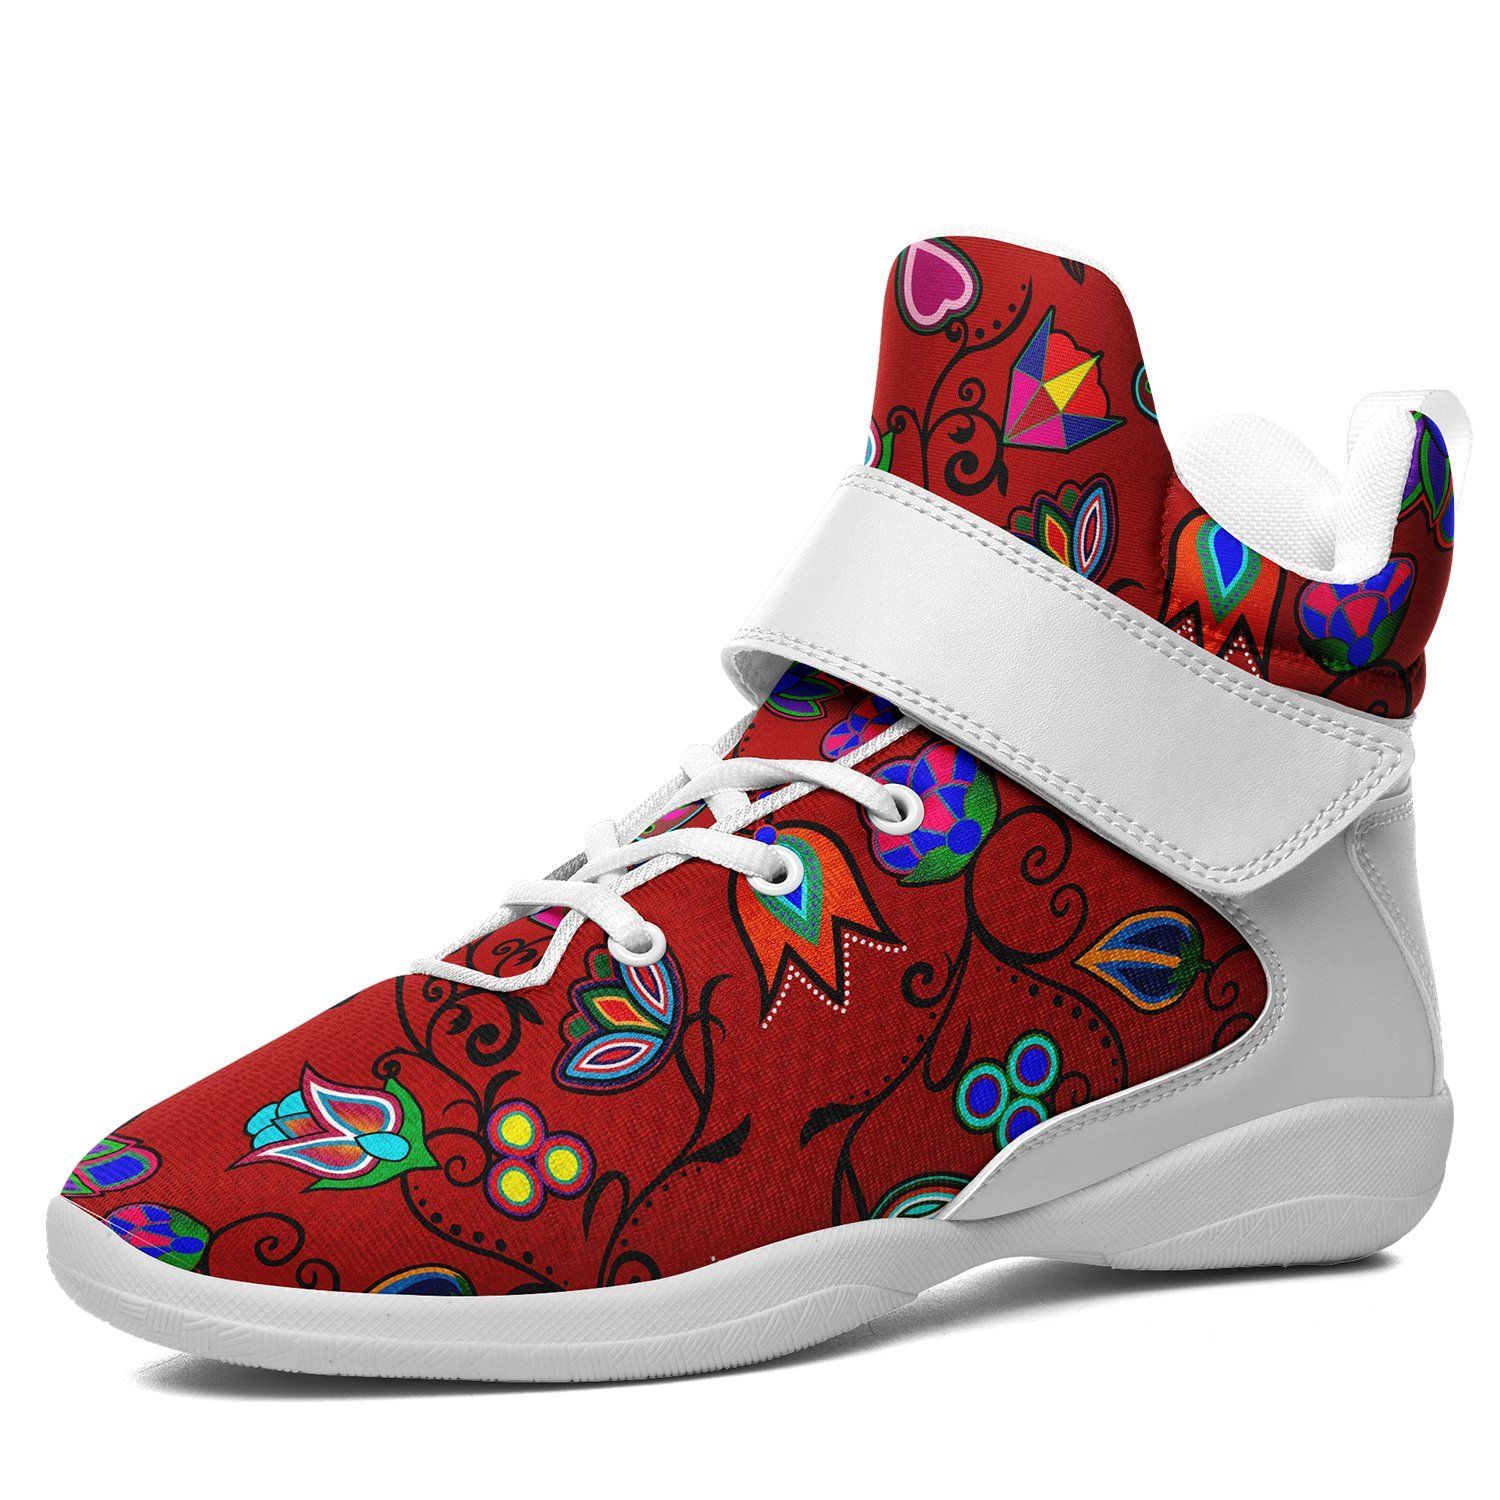 Indigenous Paisley Dahlia Kid's Ipottaa Basketball / Sport High Top Shoes 49 Dzine US Child 12.5 / EUR 30 White Sole with White Strap 